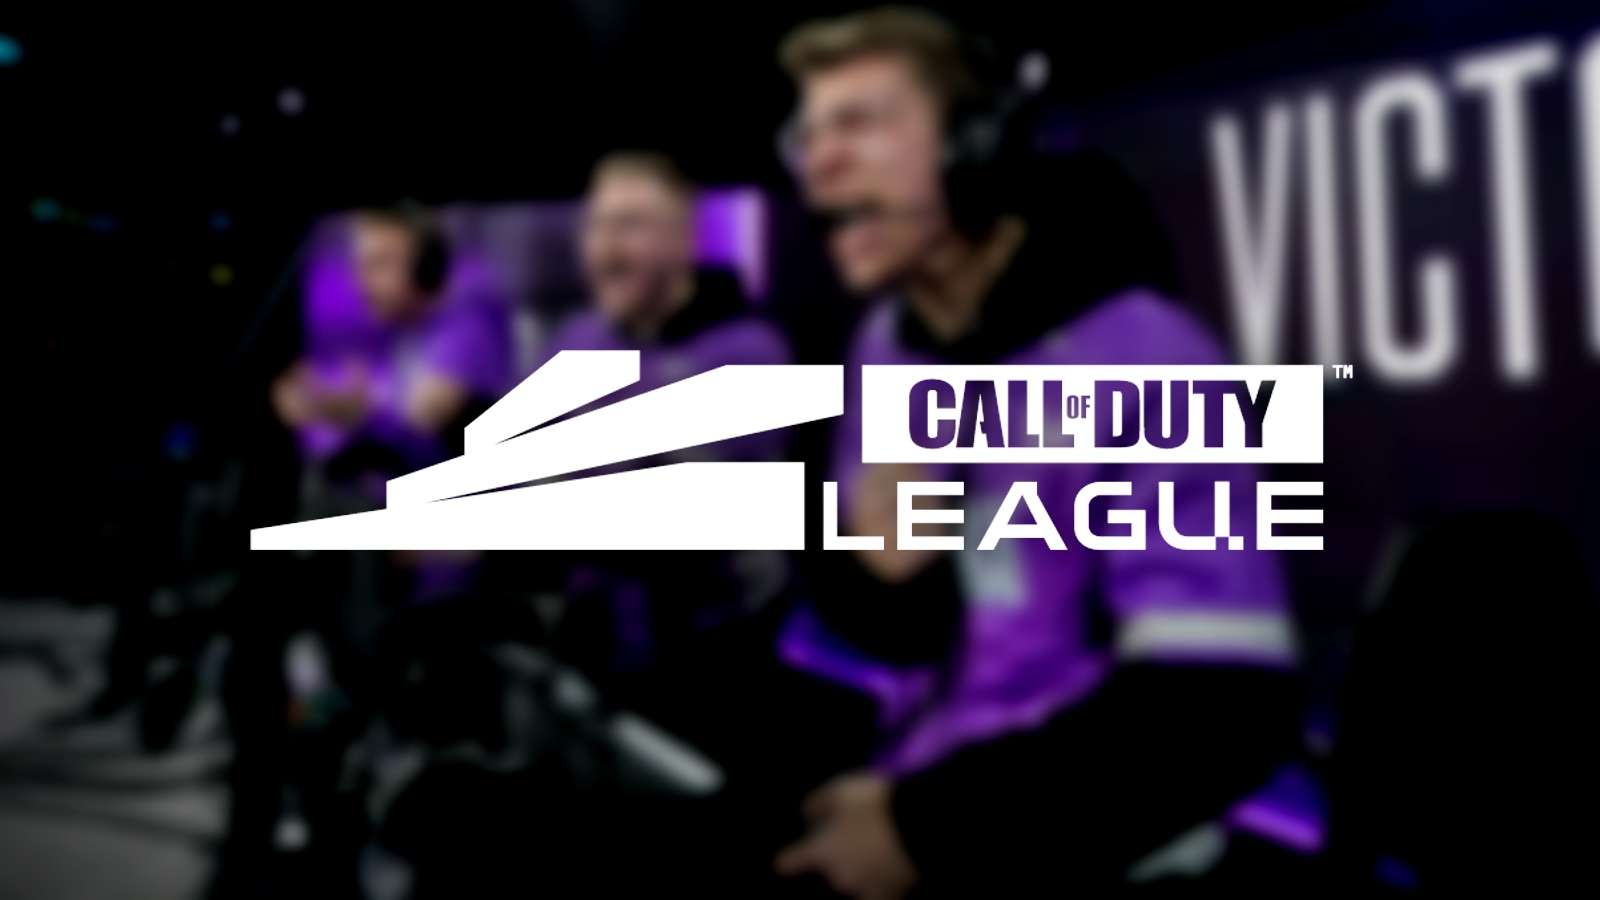 Call of Duty League logo over a blurred image of Toronto Ultra roster